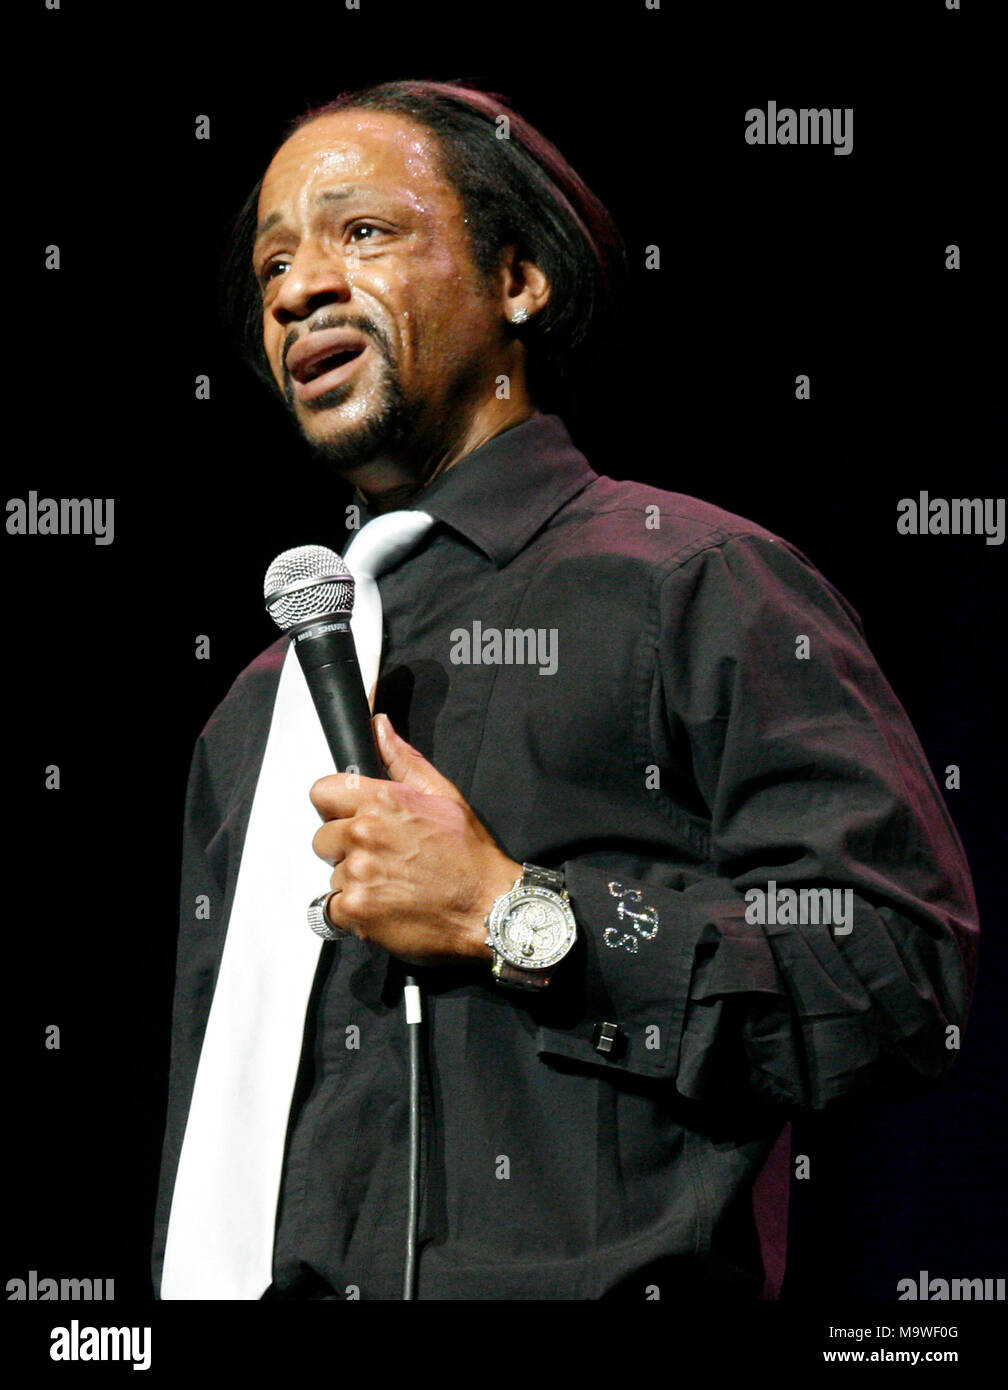 Begravelse indstudering falanks Standup Comedian Katt Williams during "It's Pimpin Pimpin Tour" at Radio  City Music Hall in New York City on April 10, 2008. ©Walik Goshorn /  MediaPunch **EXCLUSIVE** Stock Photo - Alamy